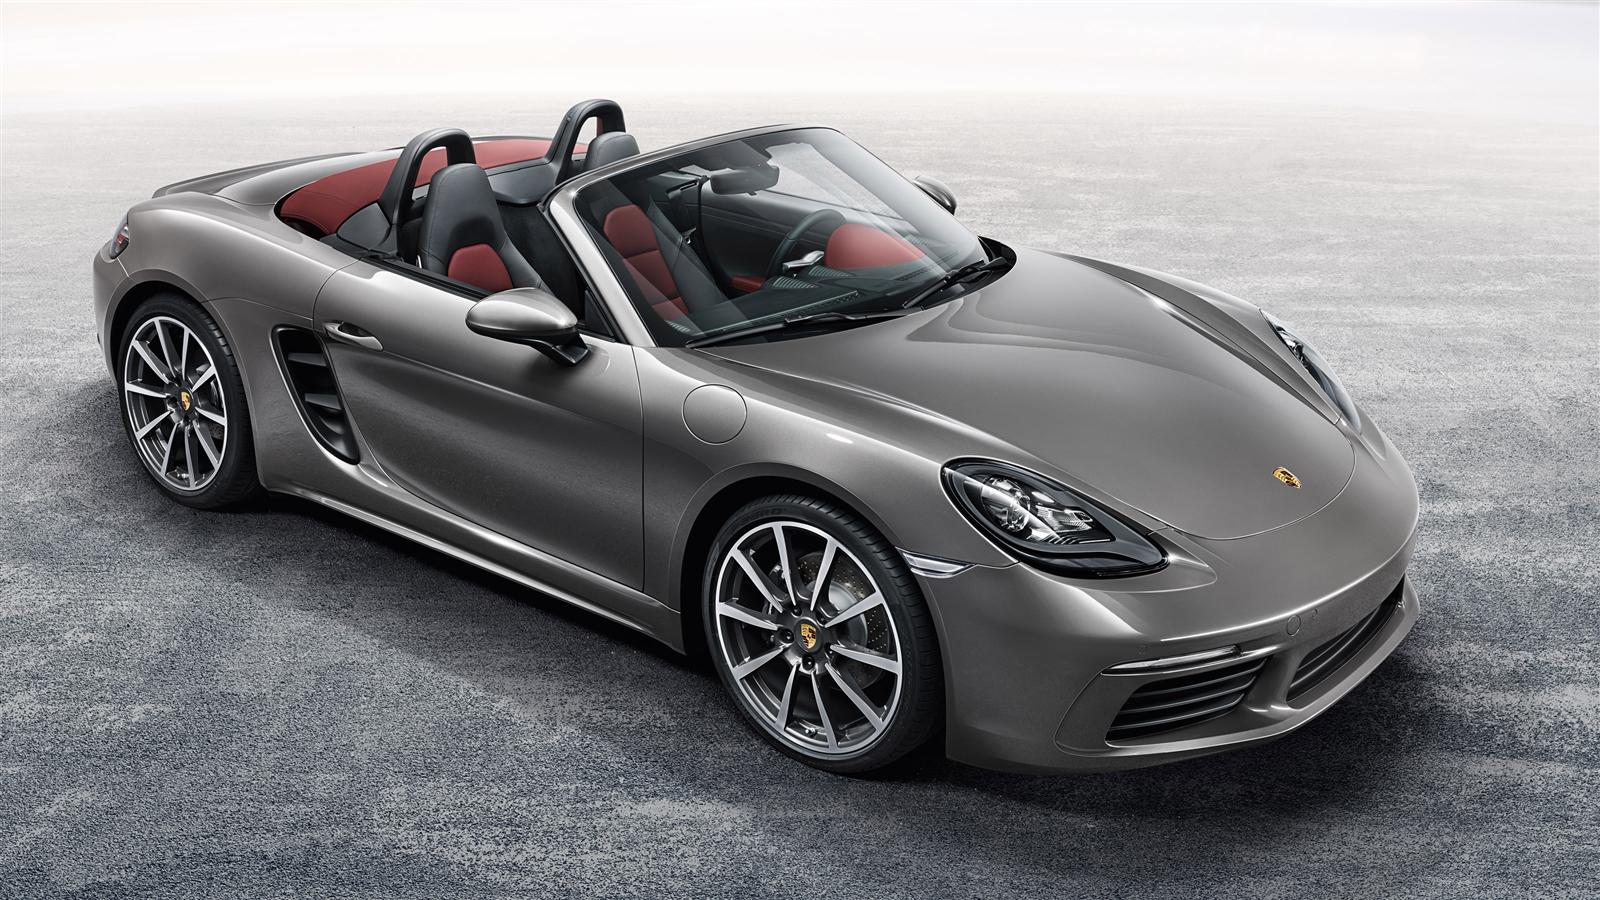 Updated 2017 Porsche 718 Boxster Front Side Profile